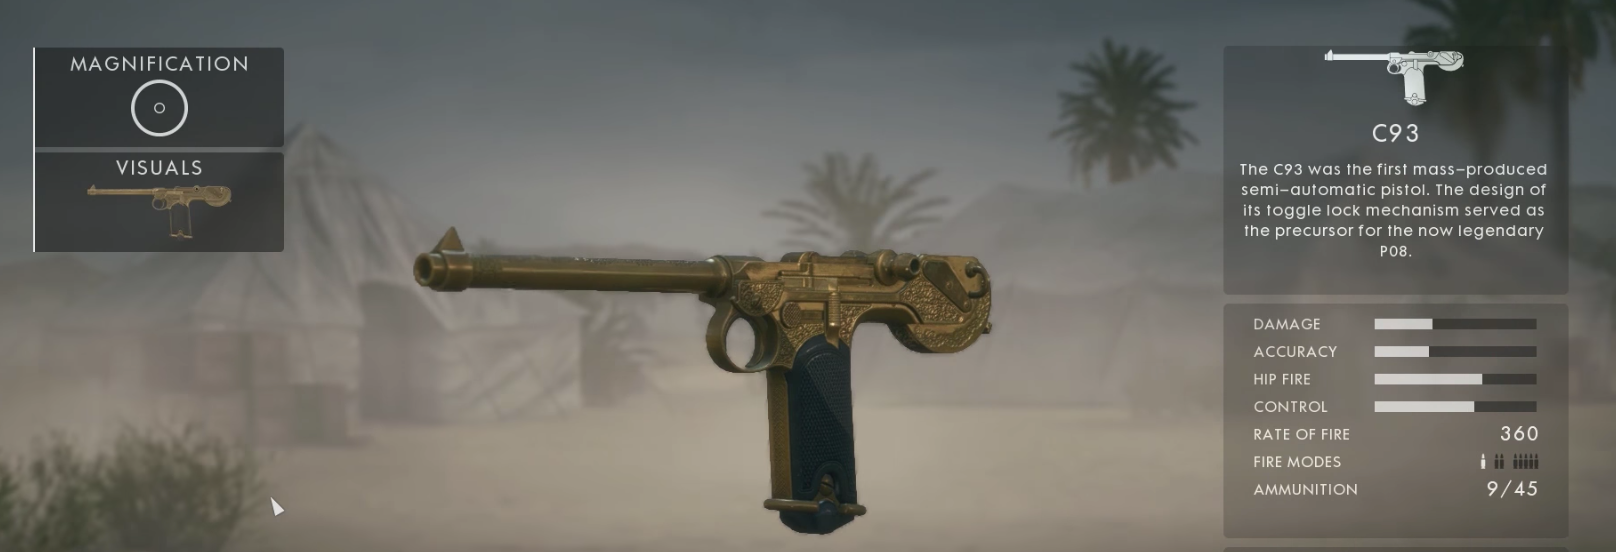 Image for The gold weapon skins in Battlefield 1 look rather flashy